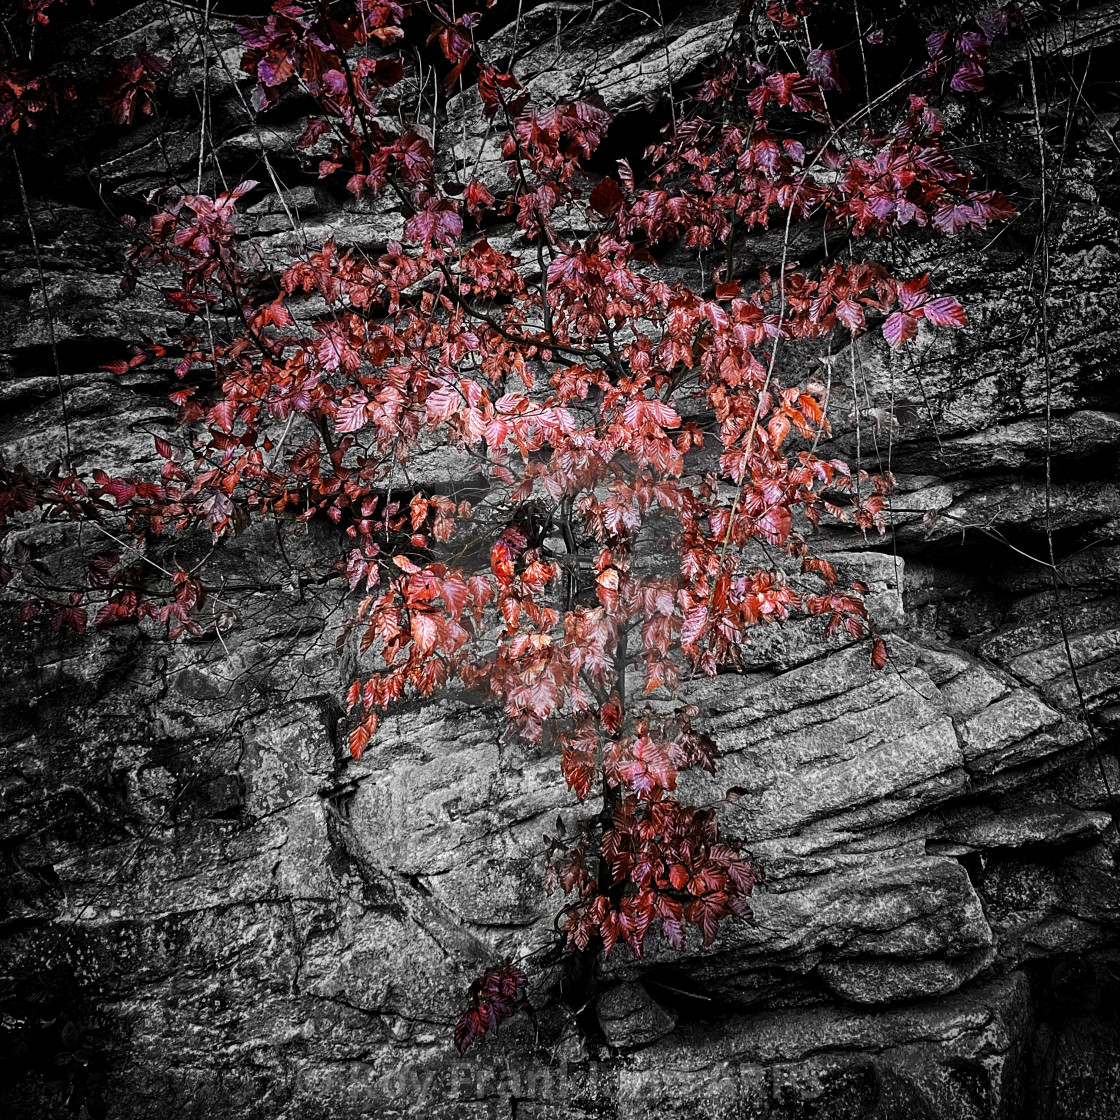 "Red leaves and rocks" stock image